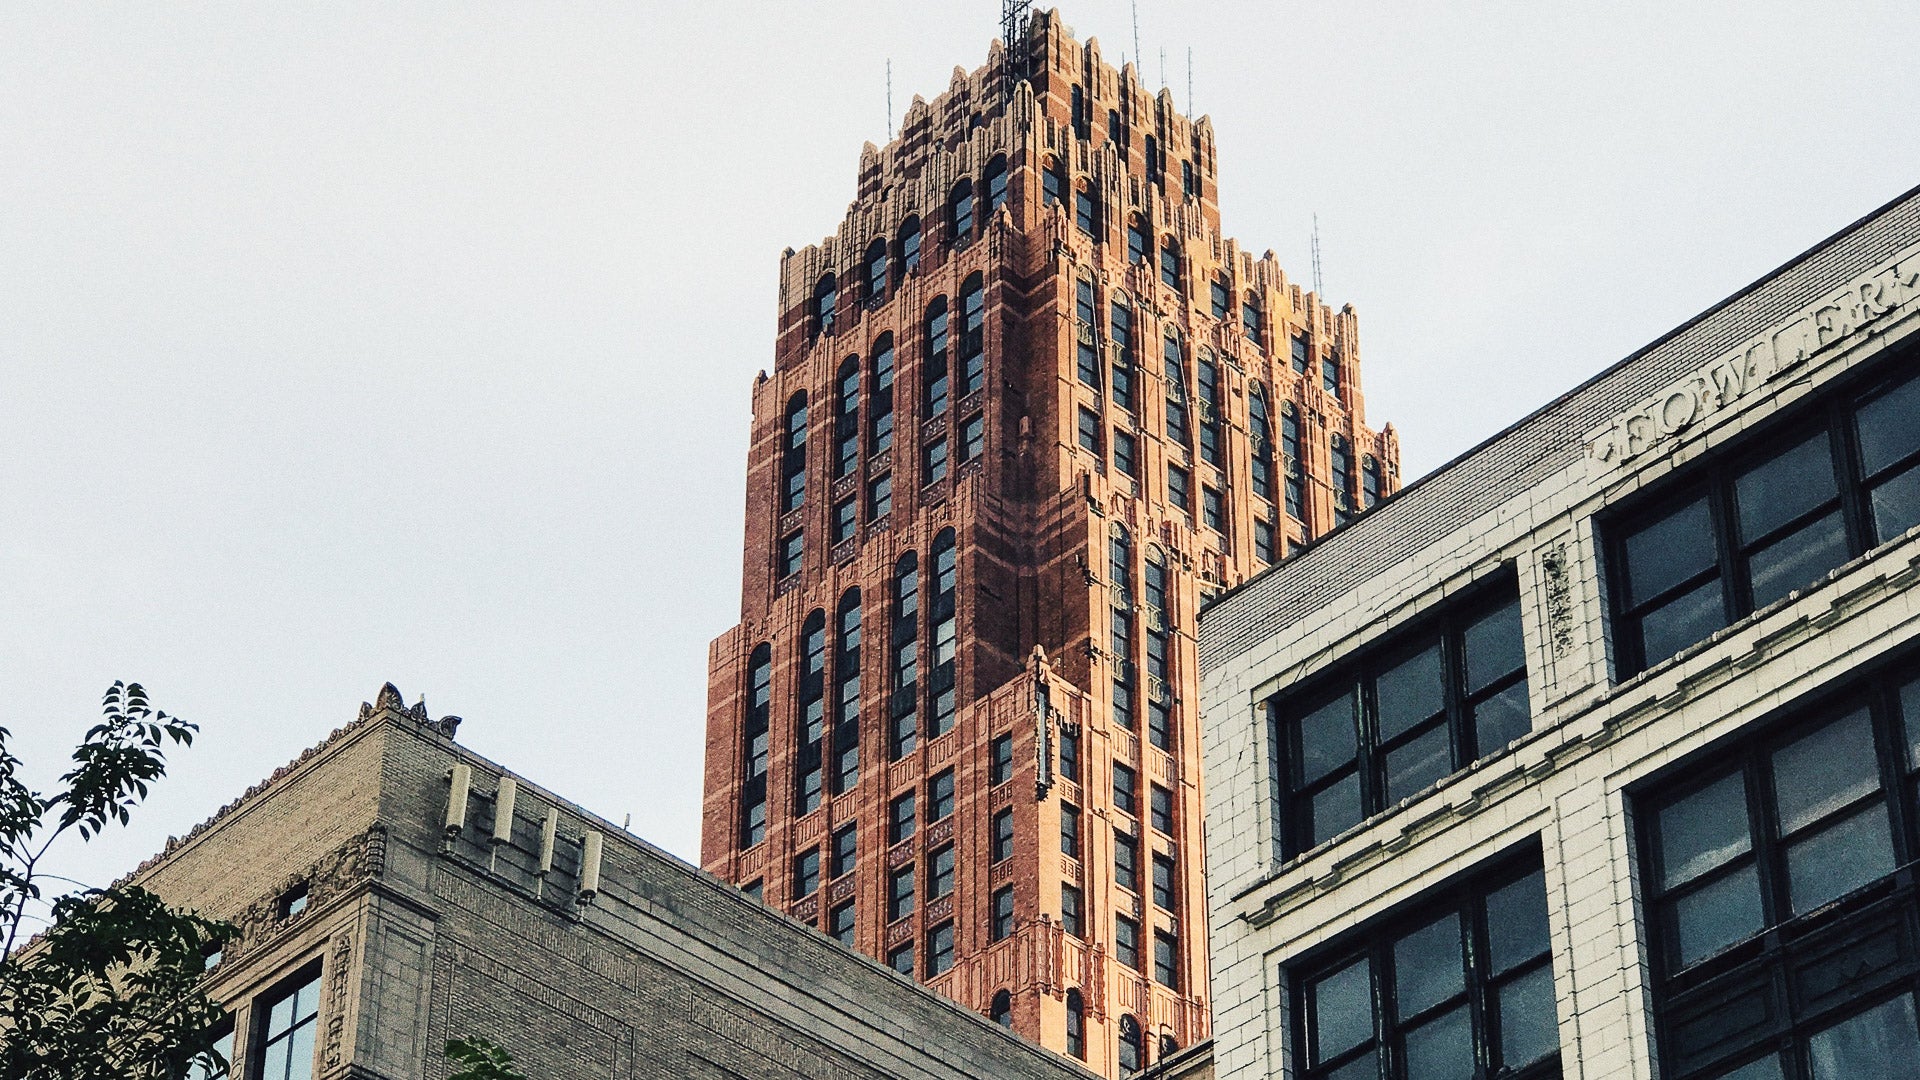 Architecture in Downtown Detroit